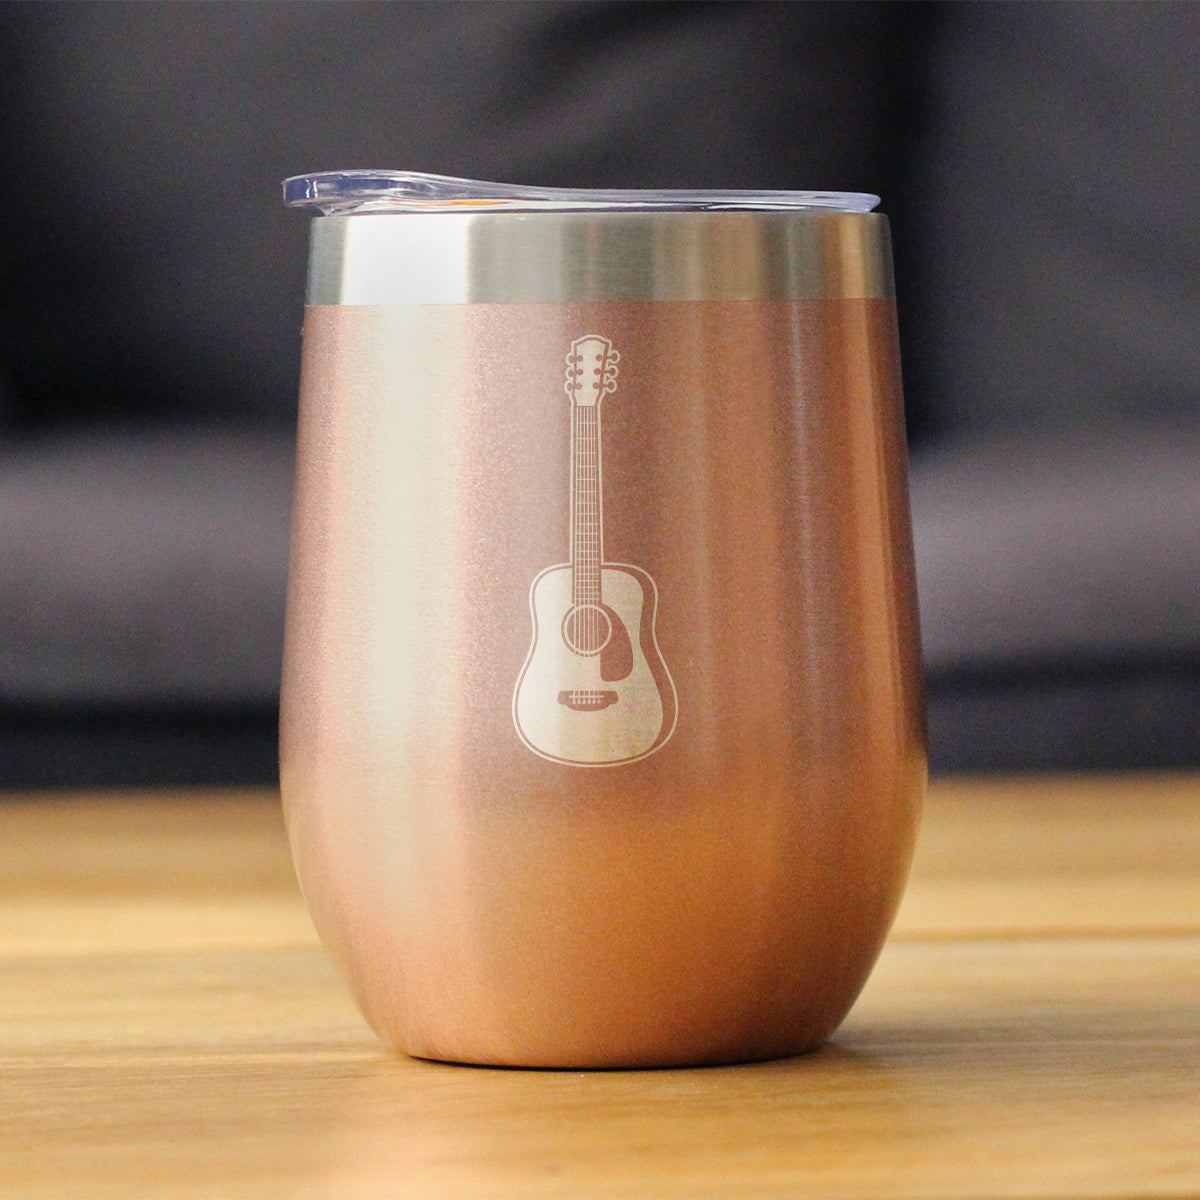 Acoustic Guitar - Wine Tumbler Glass with Sliding Lid - Stainless Steel Travel Mug - Guitarist Gifts for Women and Men Musicians